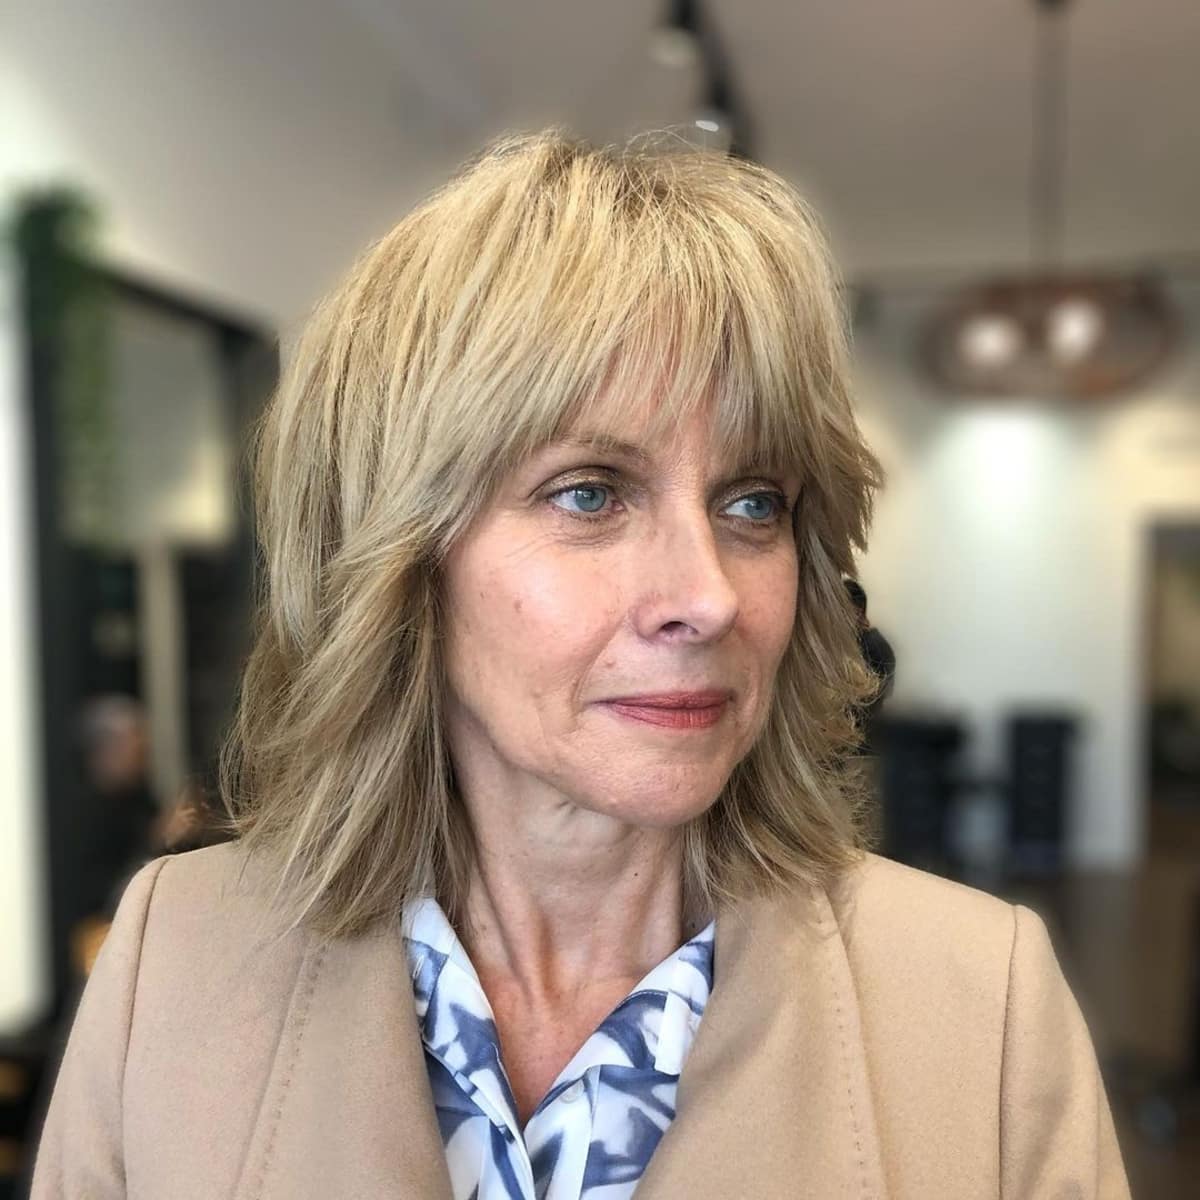 Medium-length hairstyle with bangs and layers for women over 60